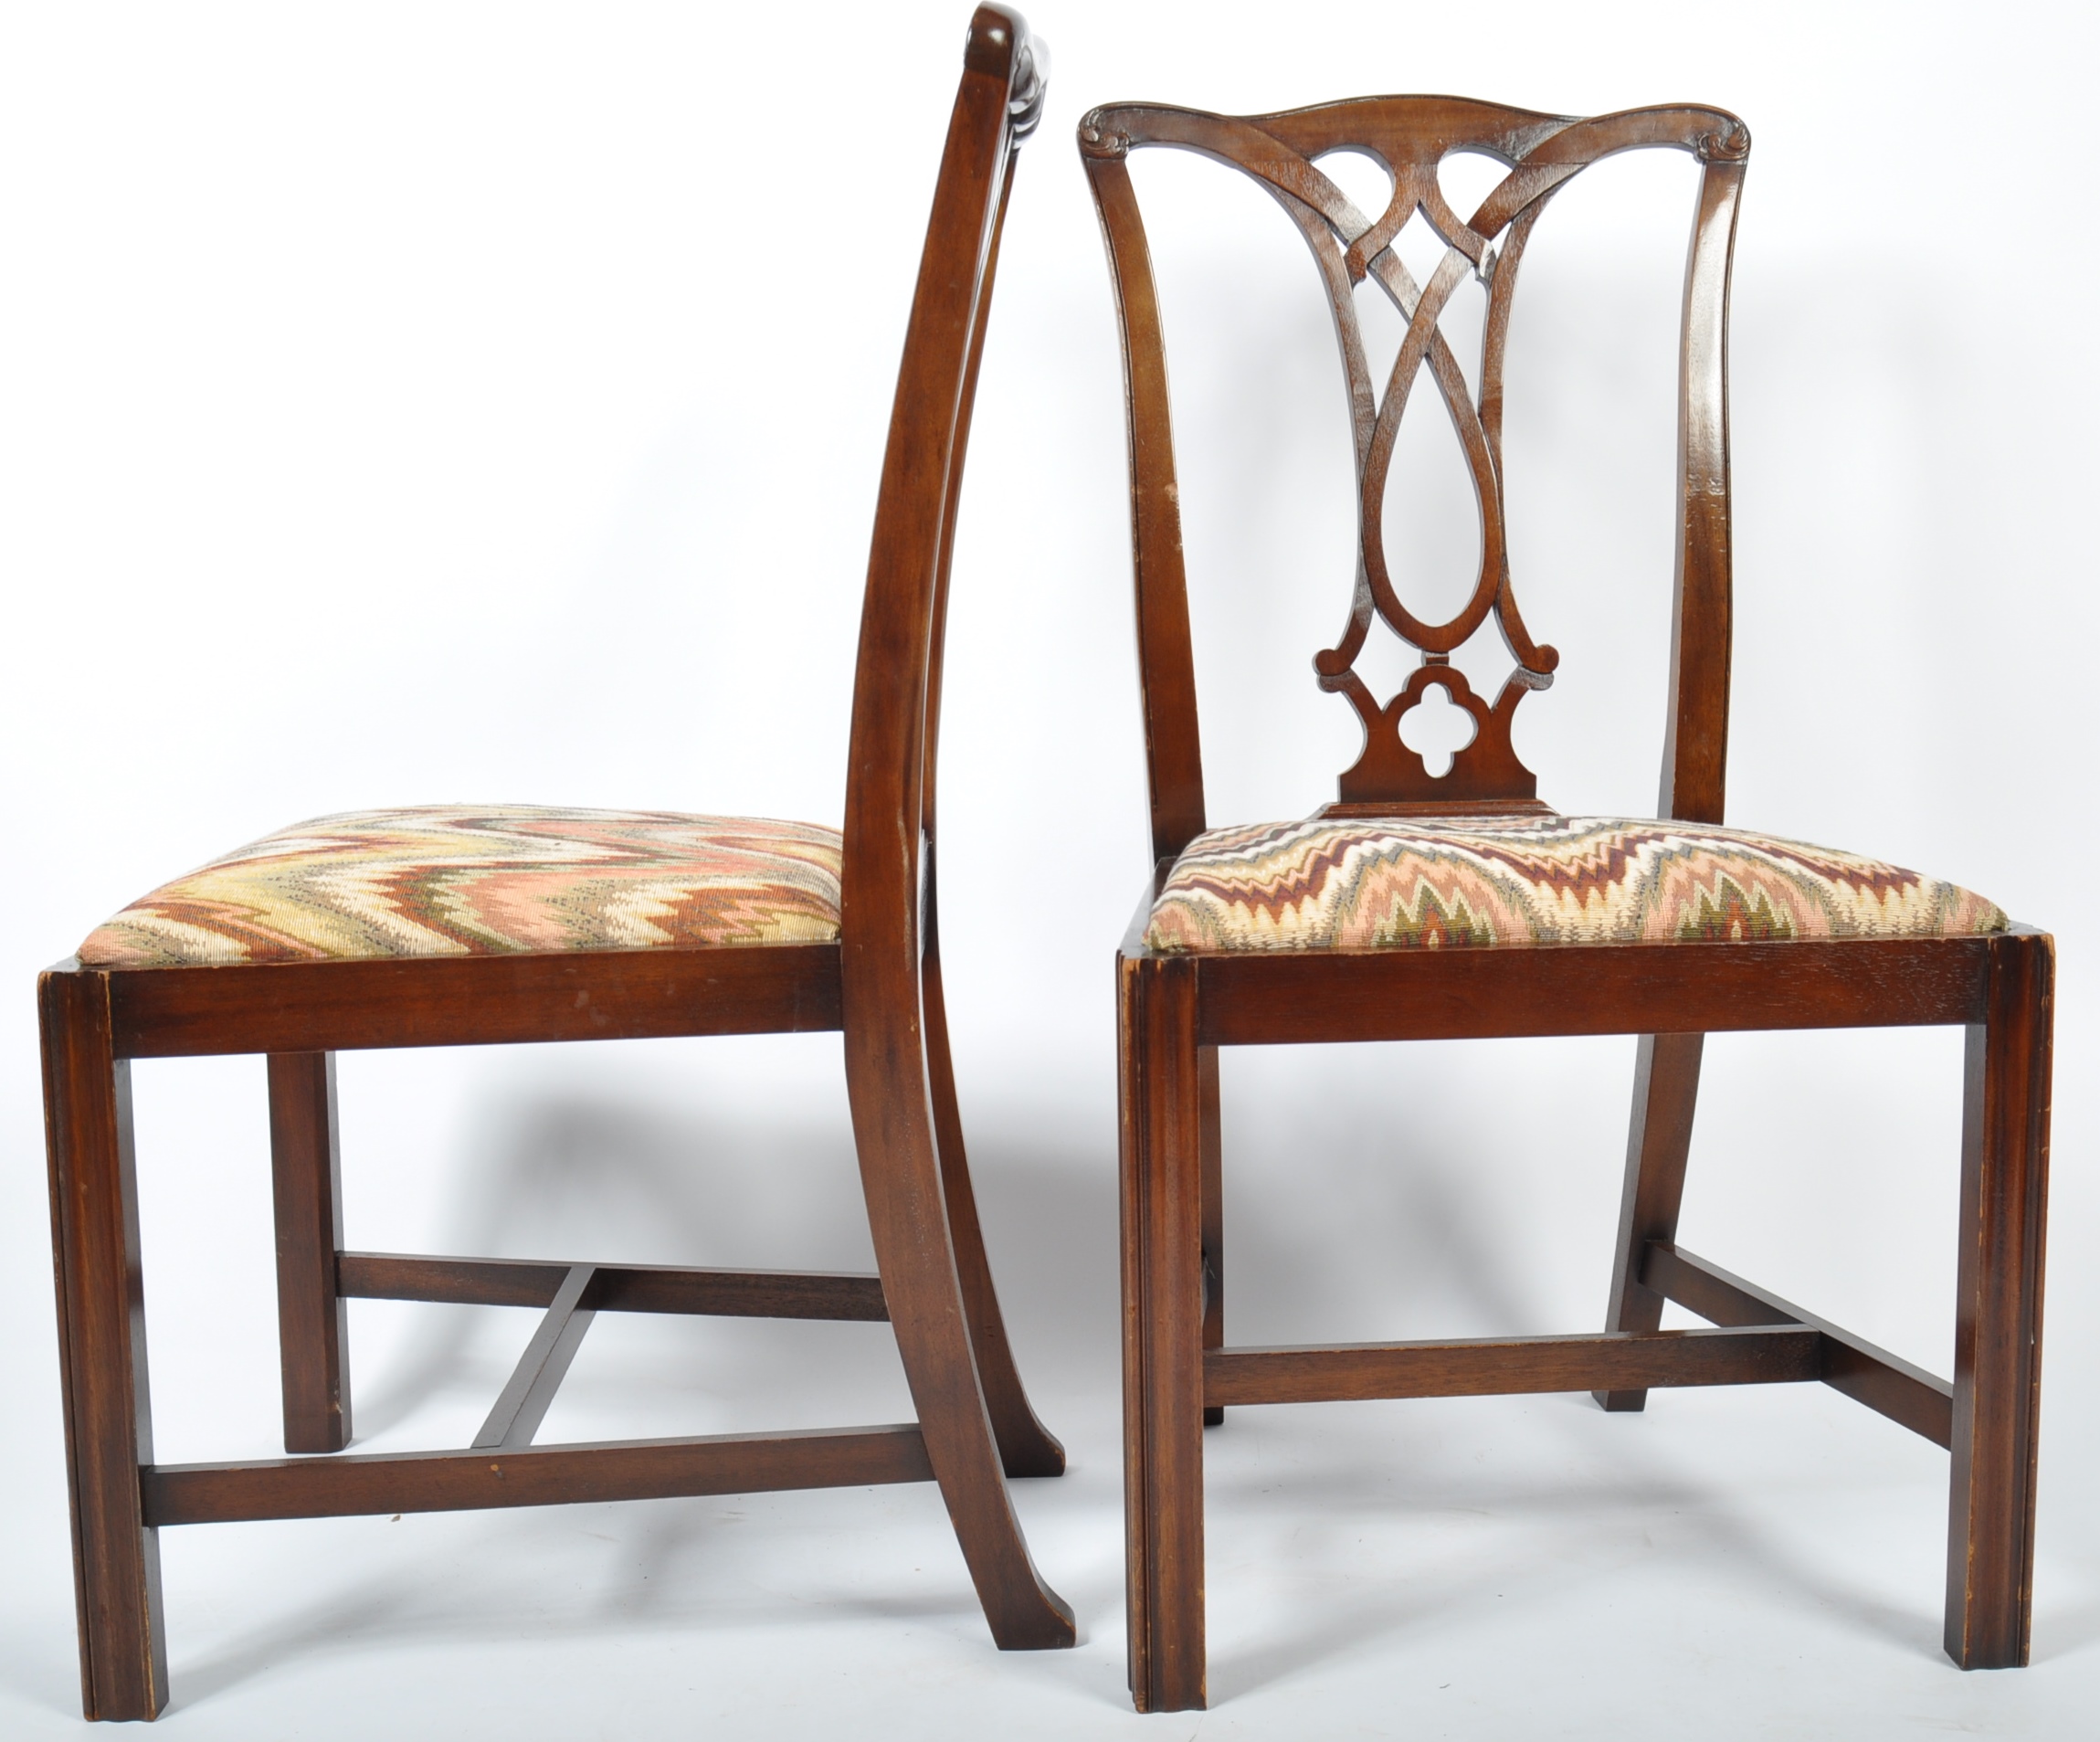 SET OF SIX 20TH CENTURY CHIPPENDALE REVIVAL CHAIRS - Image 8 of 8